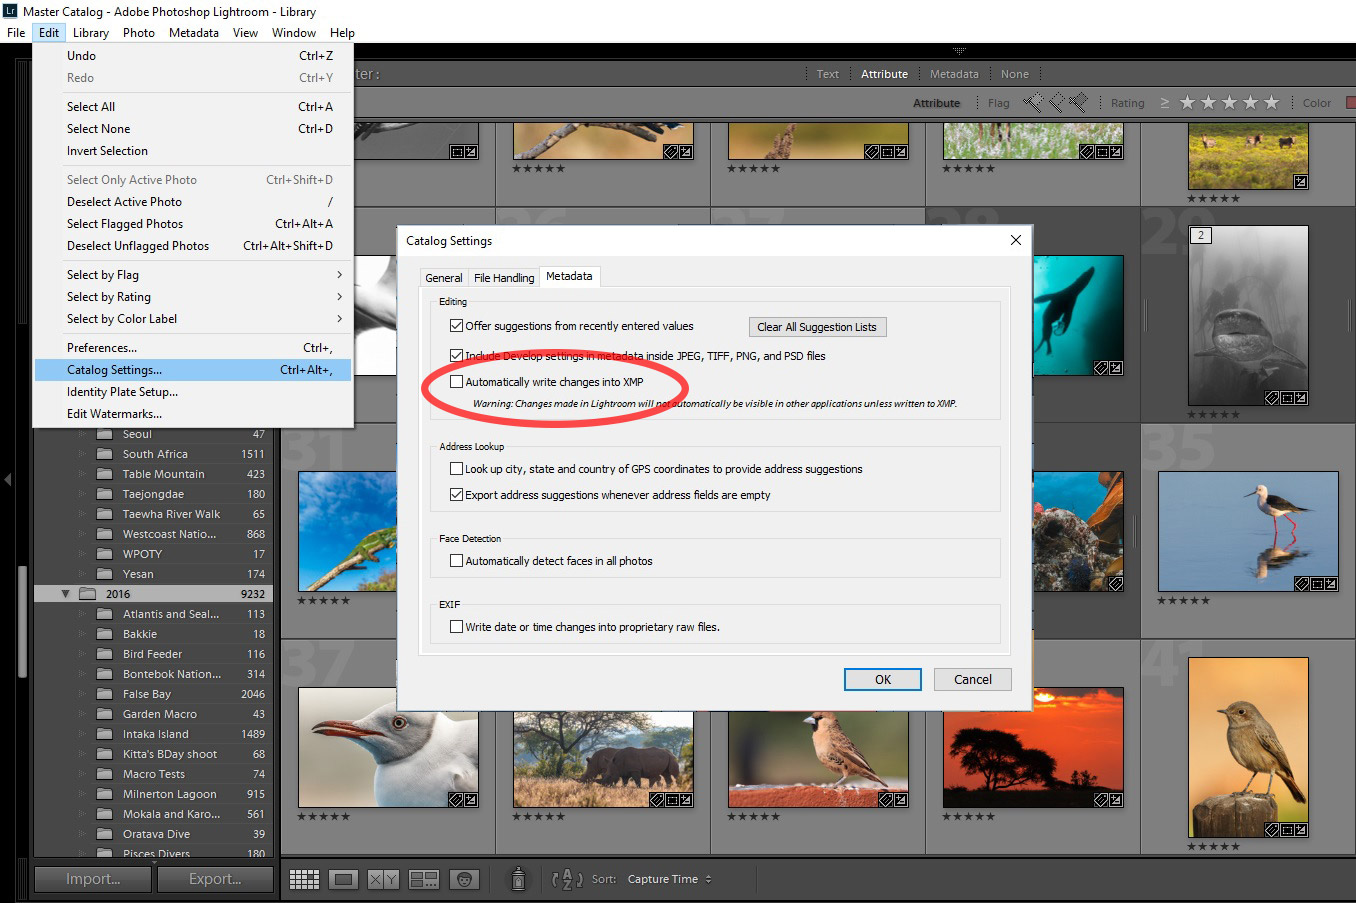 Automatically write changes to XMP in Adobe Lightroom